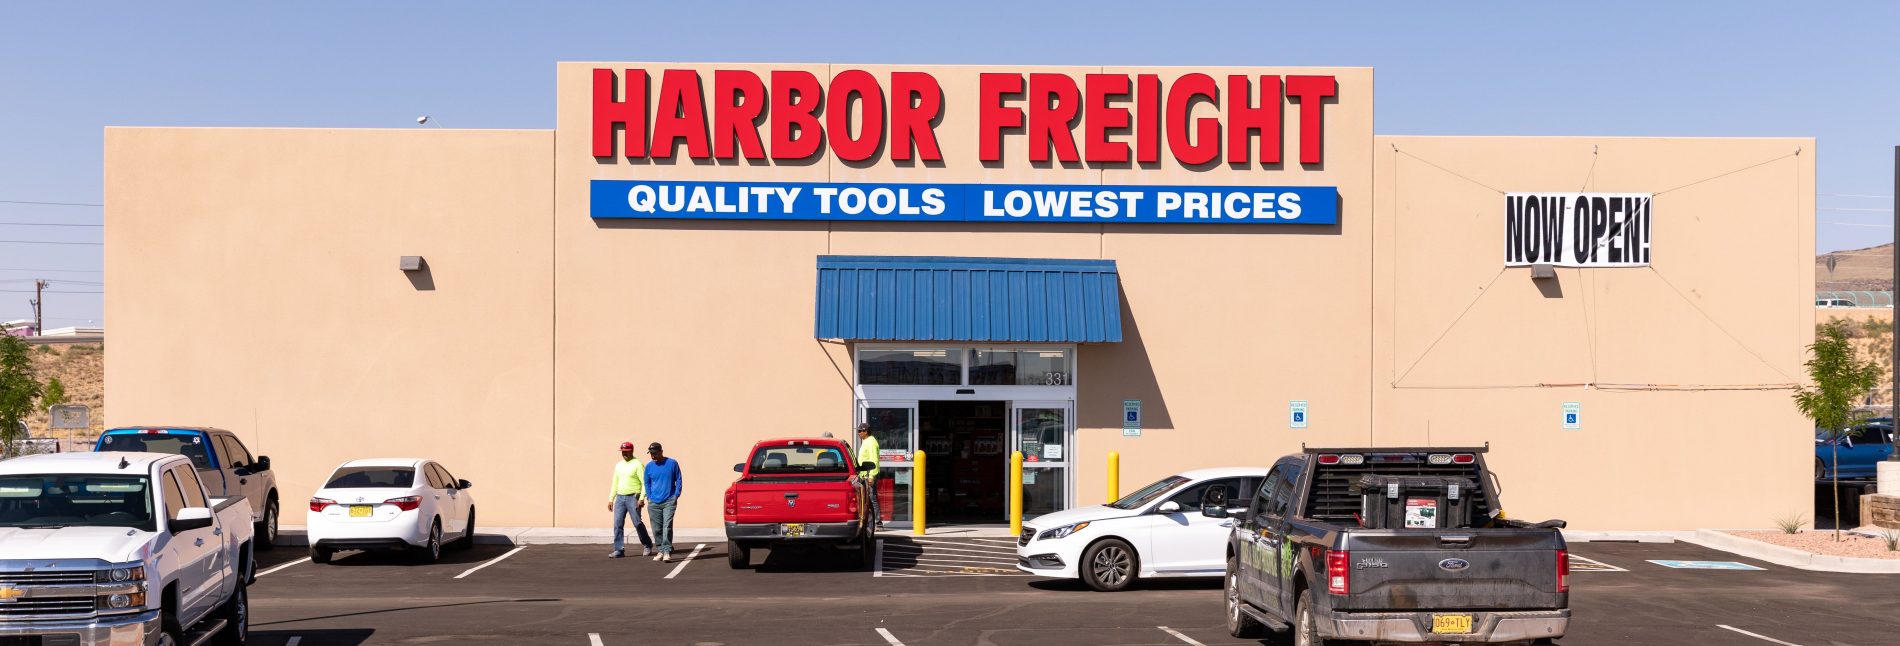 harbor-freight-opening-day-8-min